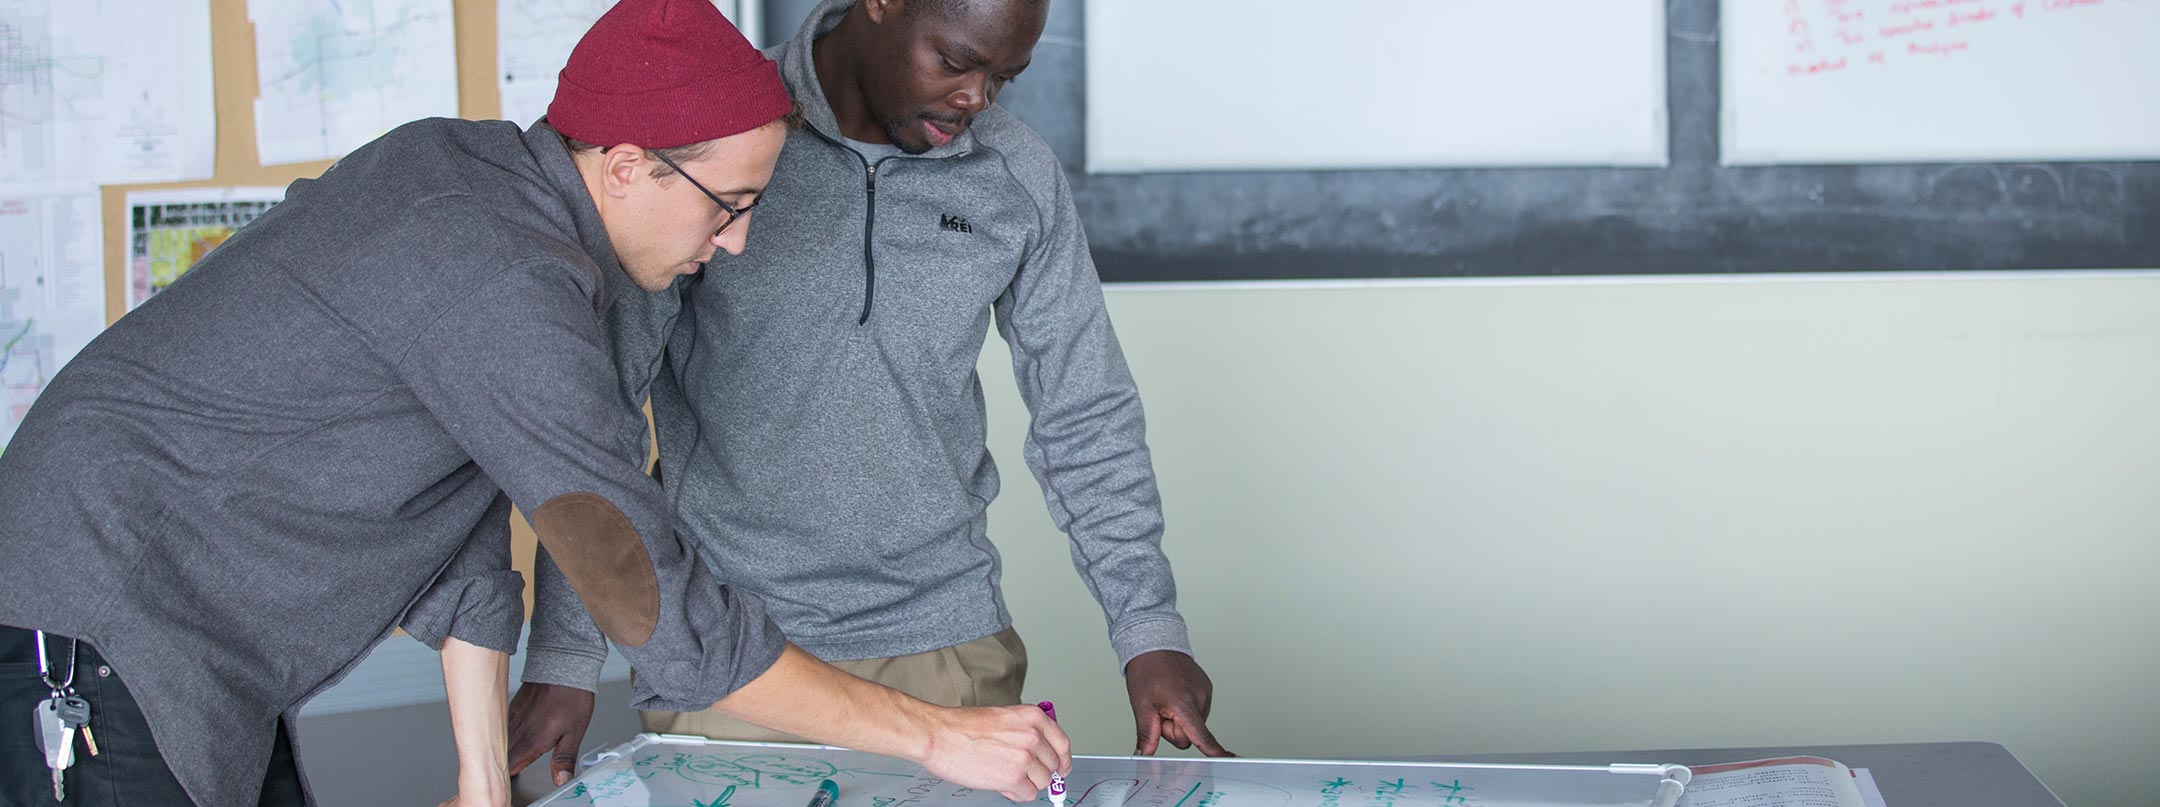 Two design students working on a project and communicating their design on a whiteboard.